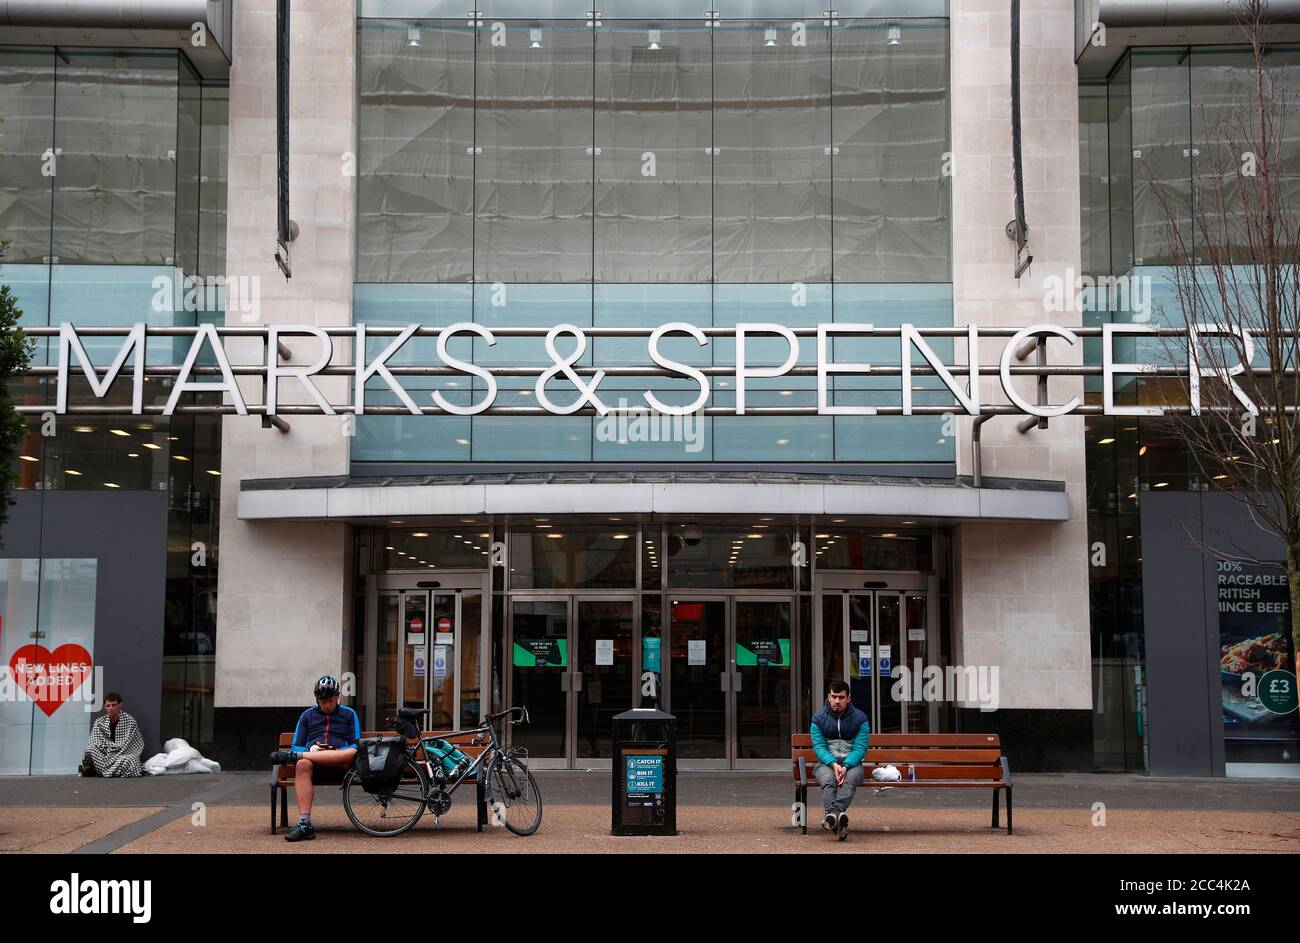 Marks and Spencer to axe 7,000 jobs over next three months